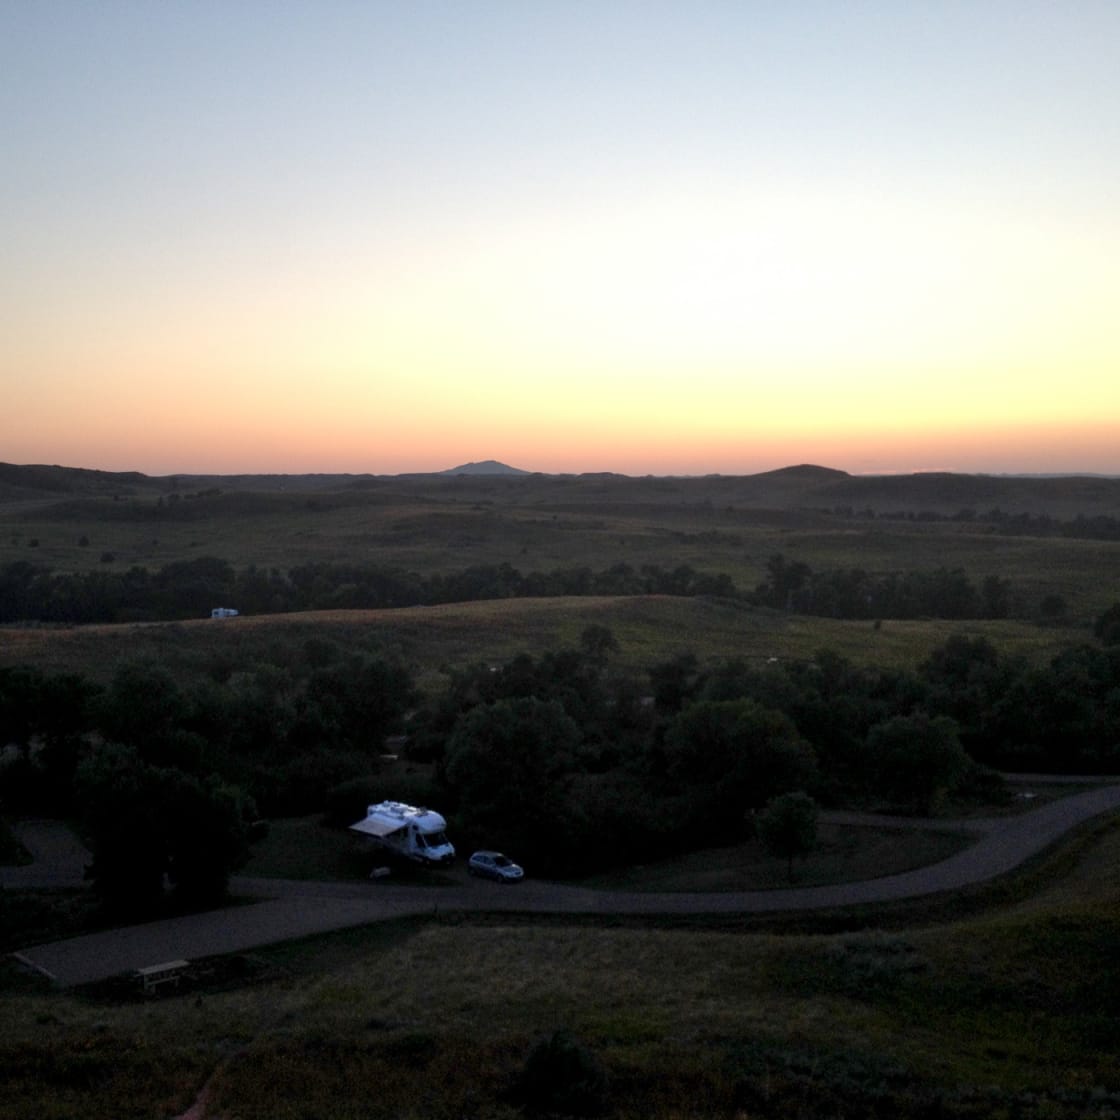 View of the sunset from the Overlook hill near the entrance of the campground.